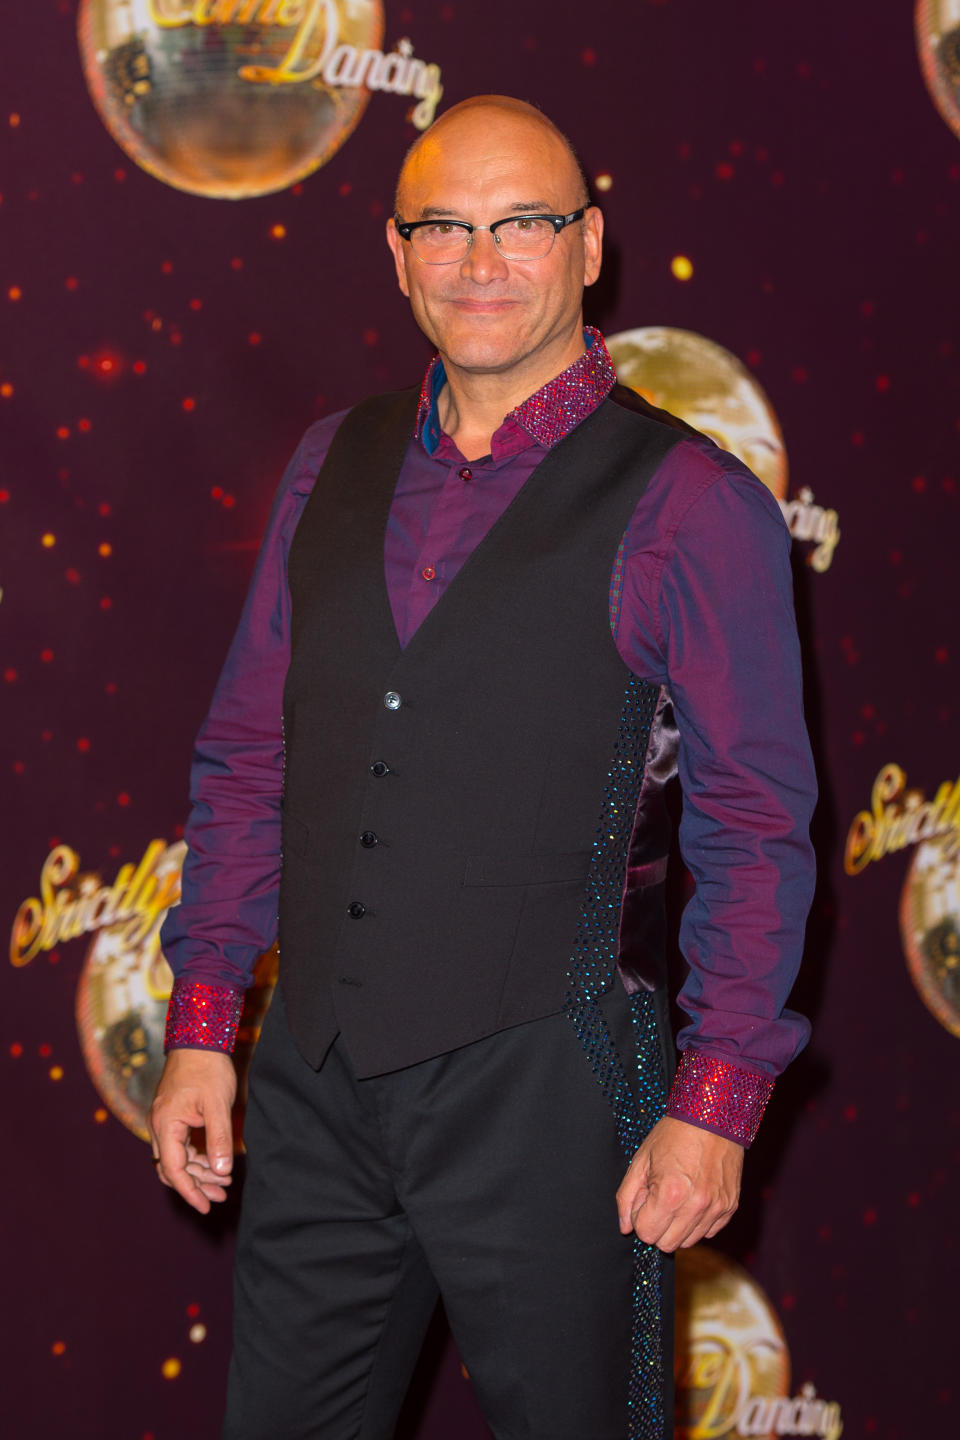 Gregg Wallace attending the launch of Strictly Come Dancing 2014, at Elstree Studios, Borehamwood, Hertfordshire.